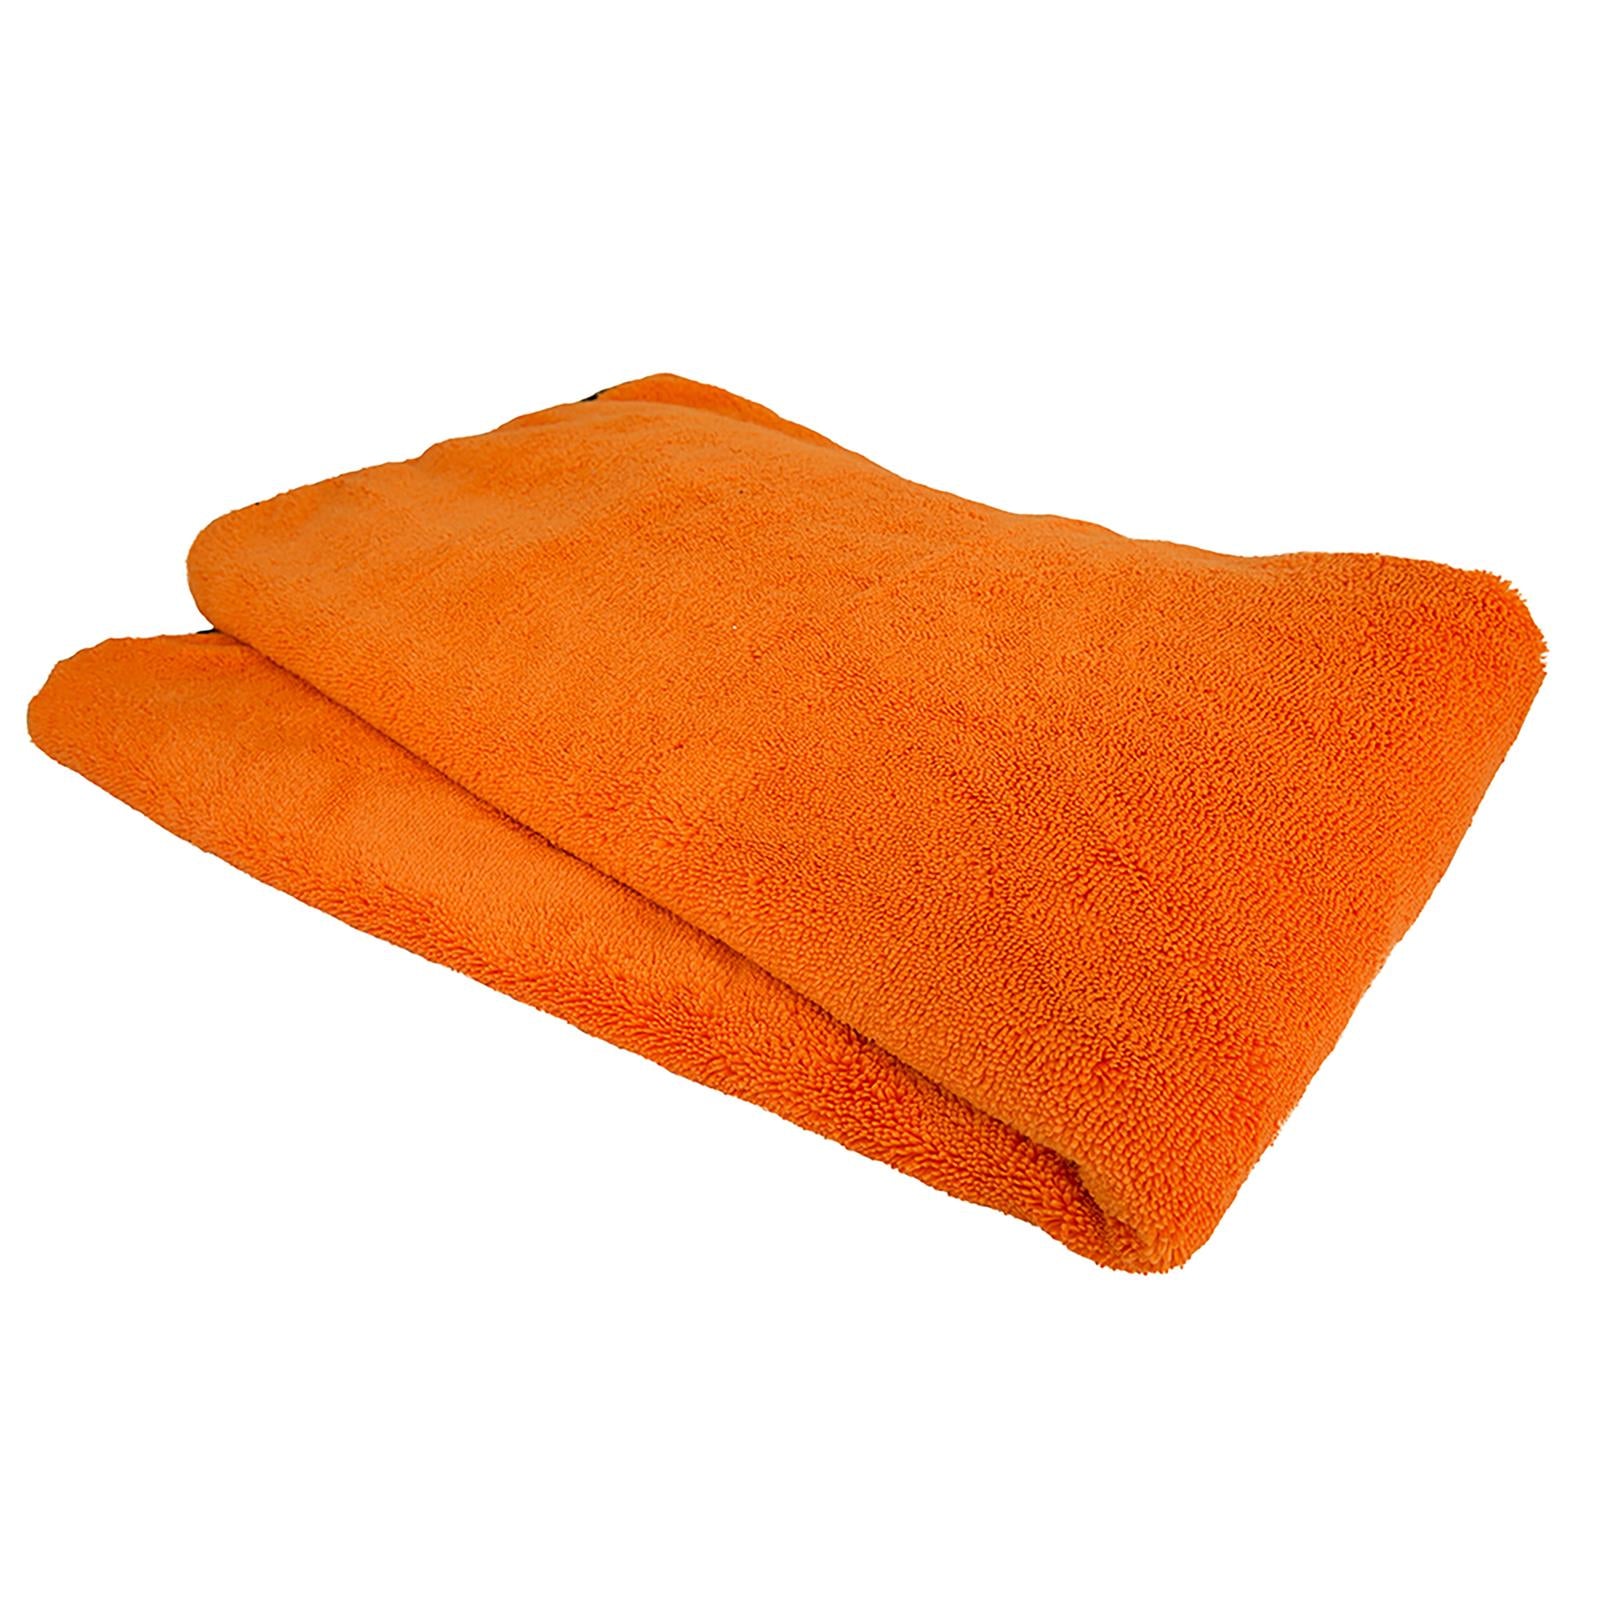 Soft orange cloth for wiping down vintage cars